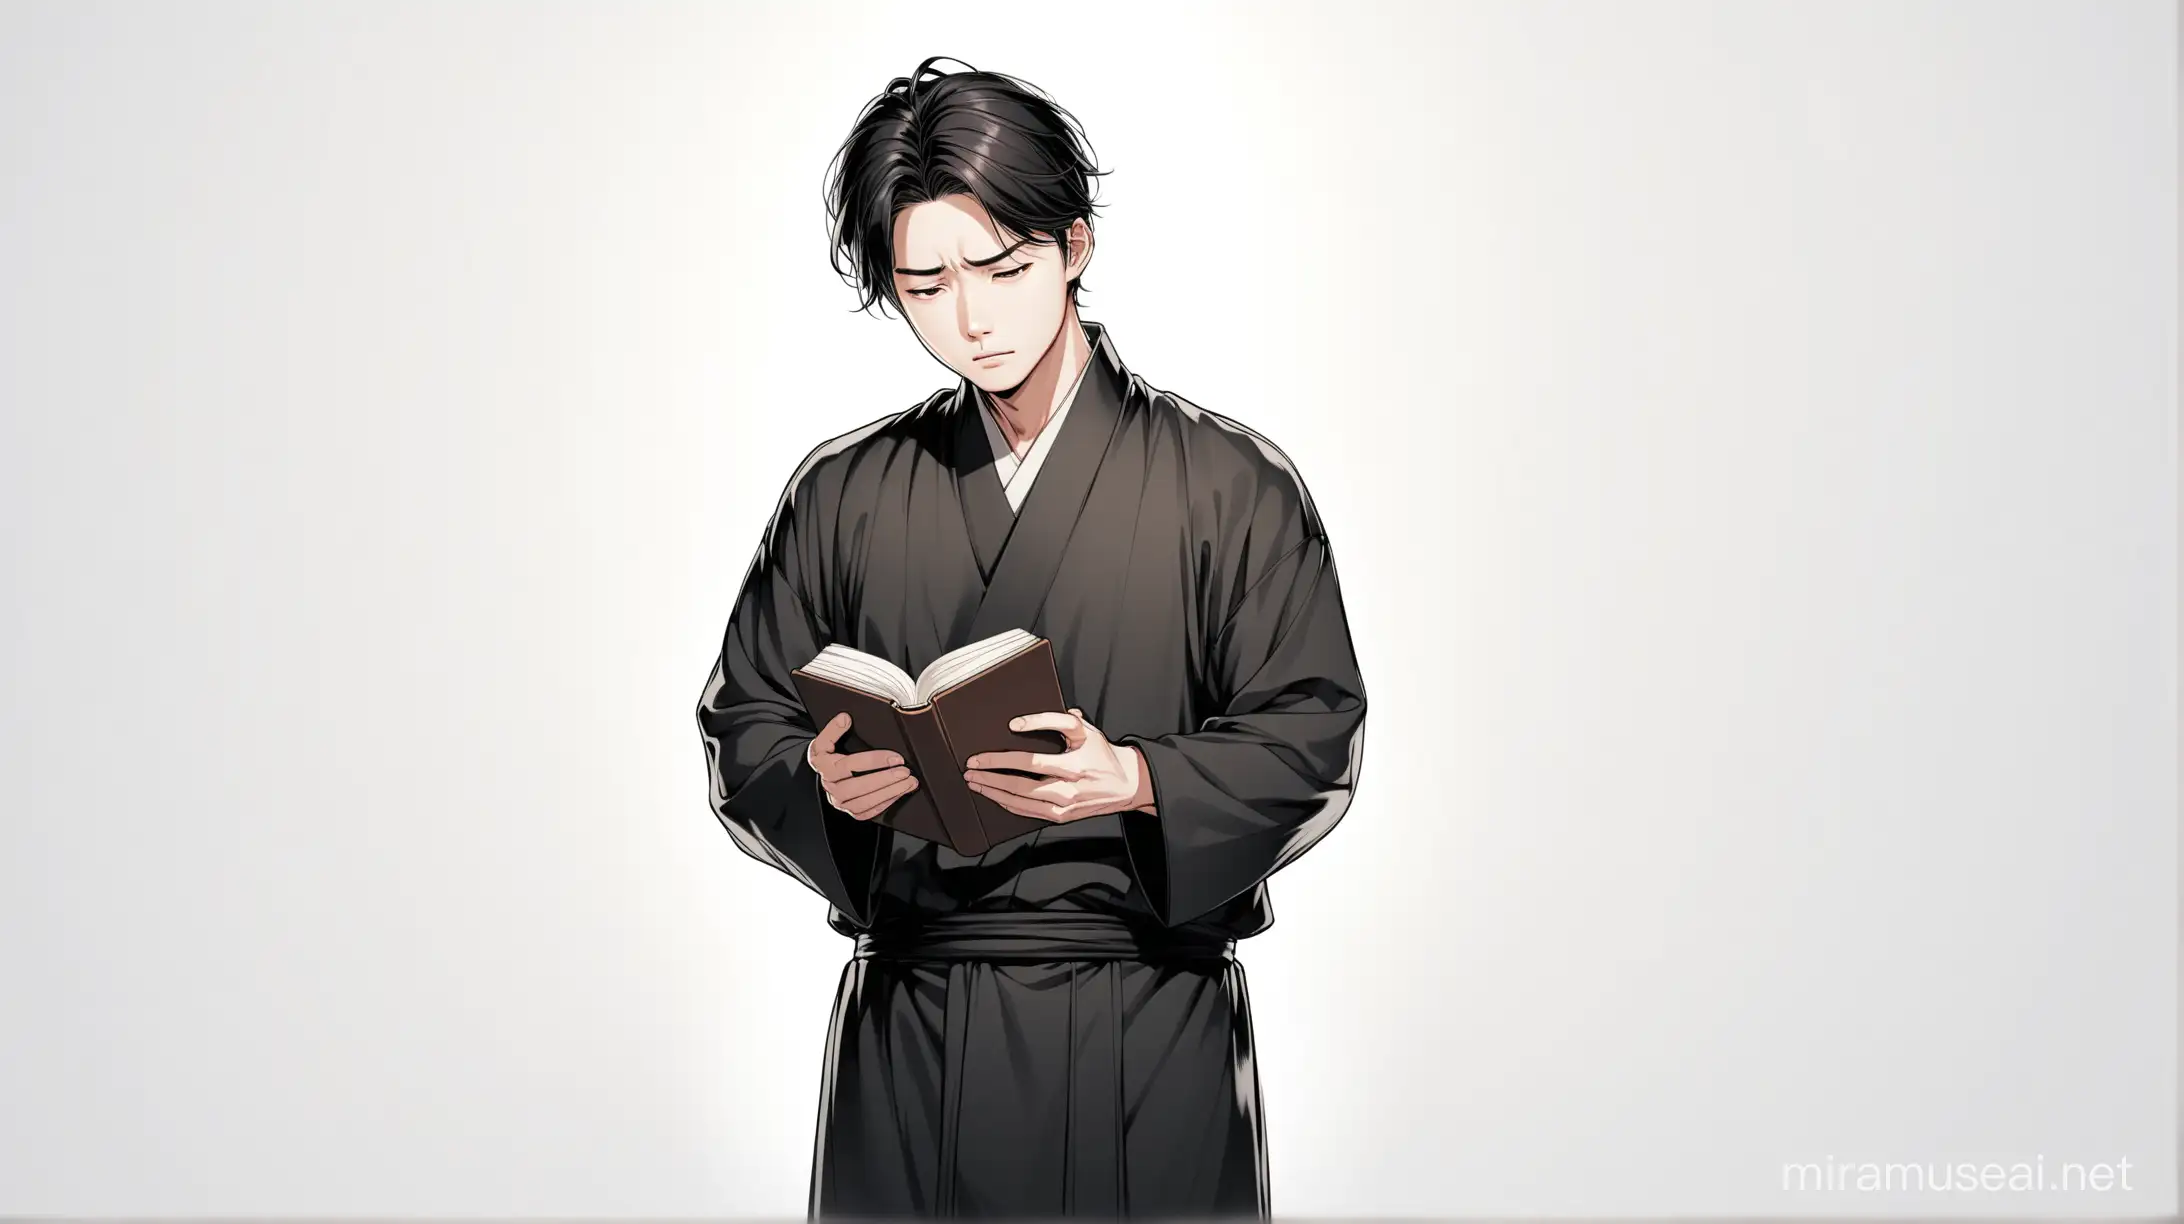 Korean Man in Traditional Attire Holding Book with Anxious Expression